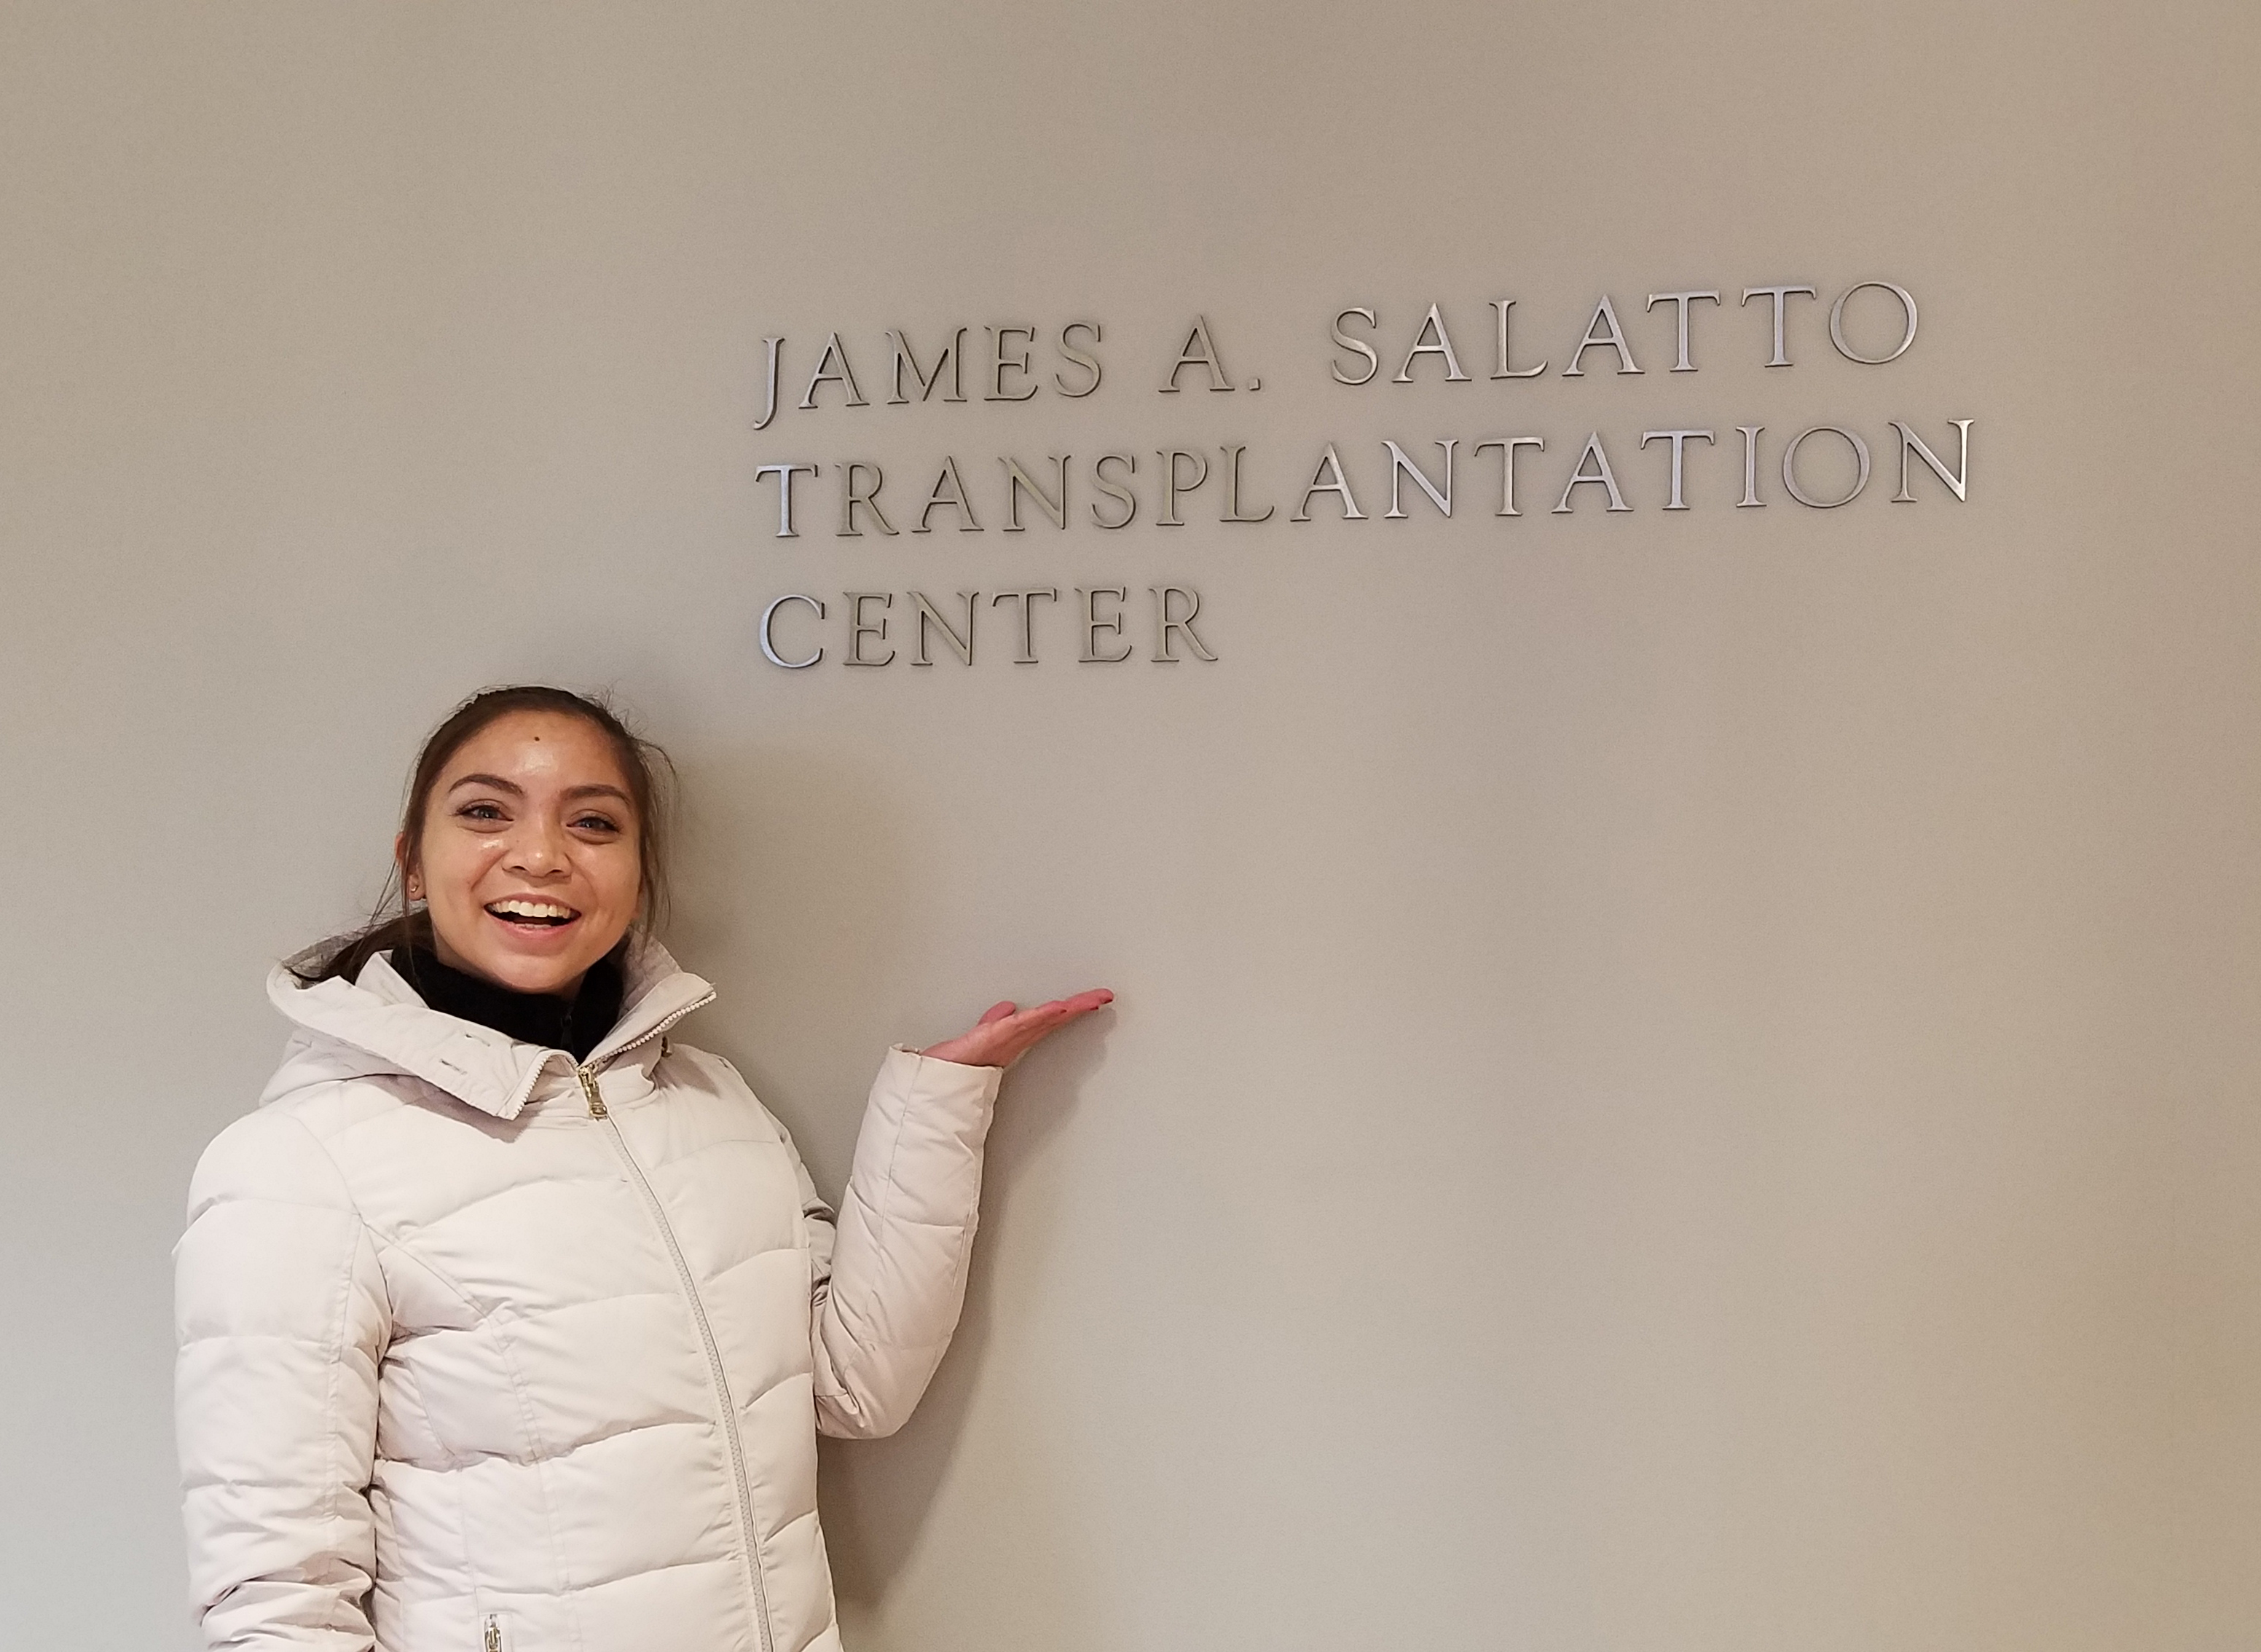 Melia Bernal at her “second home,” the James A. Salatto Transplantation Center at Yale-New Haven Hospital.